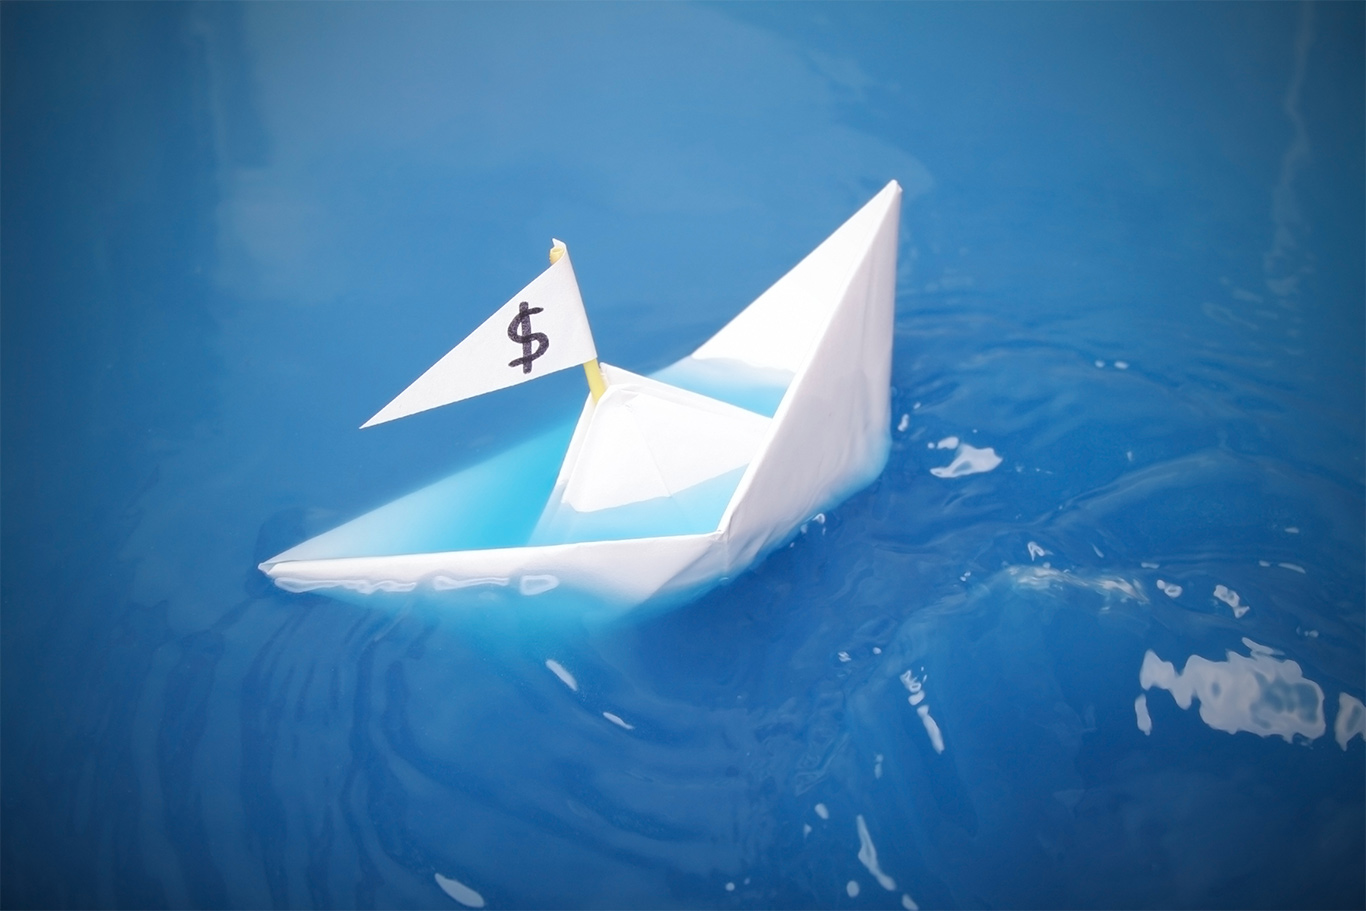 paper boat with a dollar sign on its flag is sinking in blue water